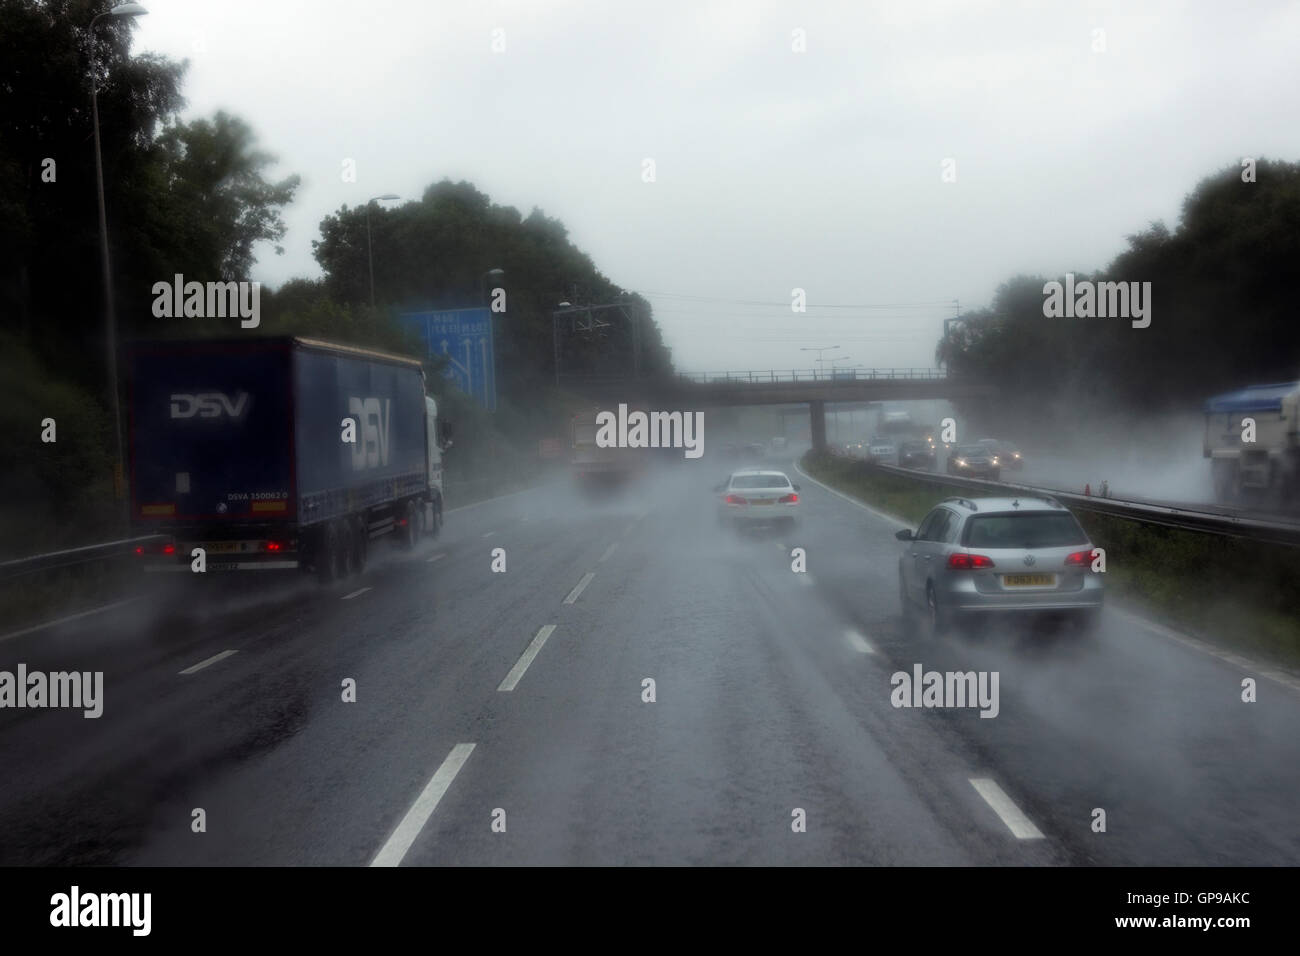 driving in middle lane on UK motorway in poor wet conditions surrounded by trucks and cars Stock Photo